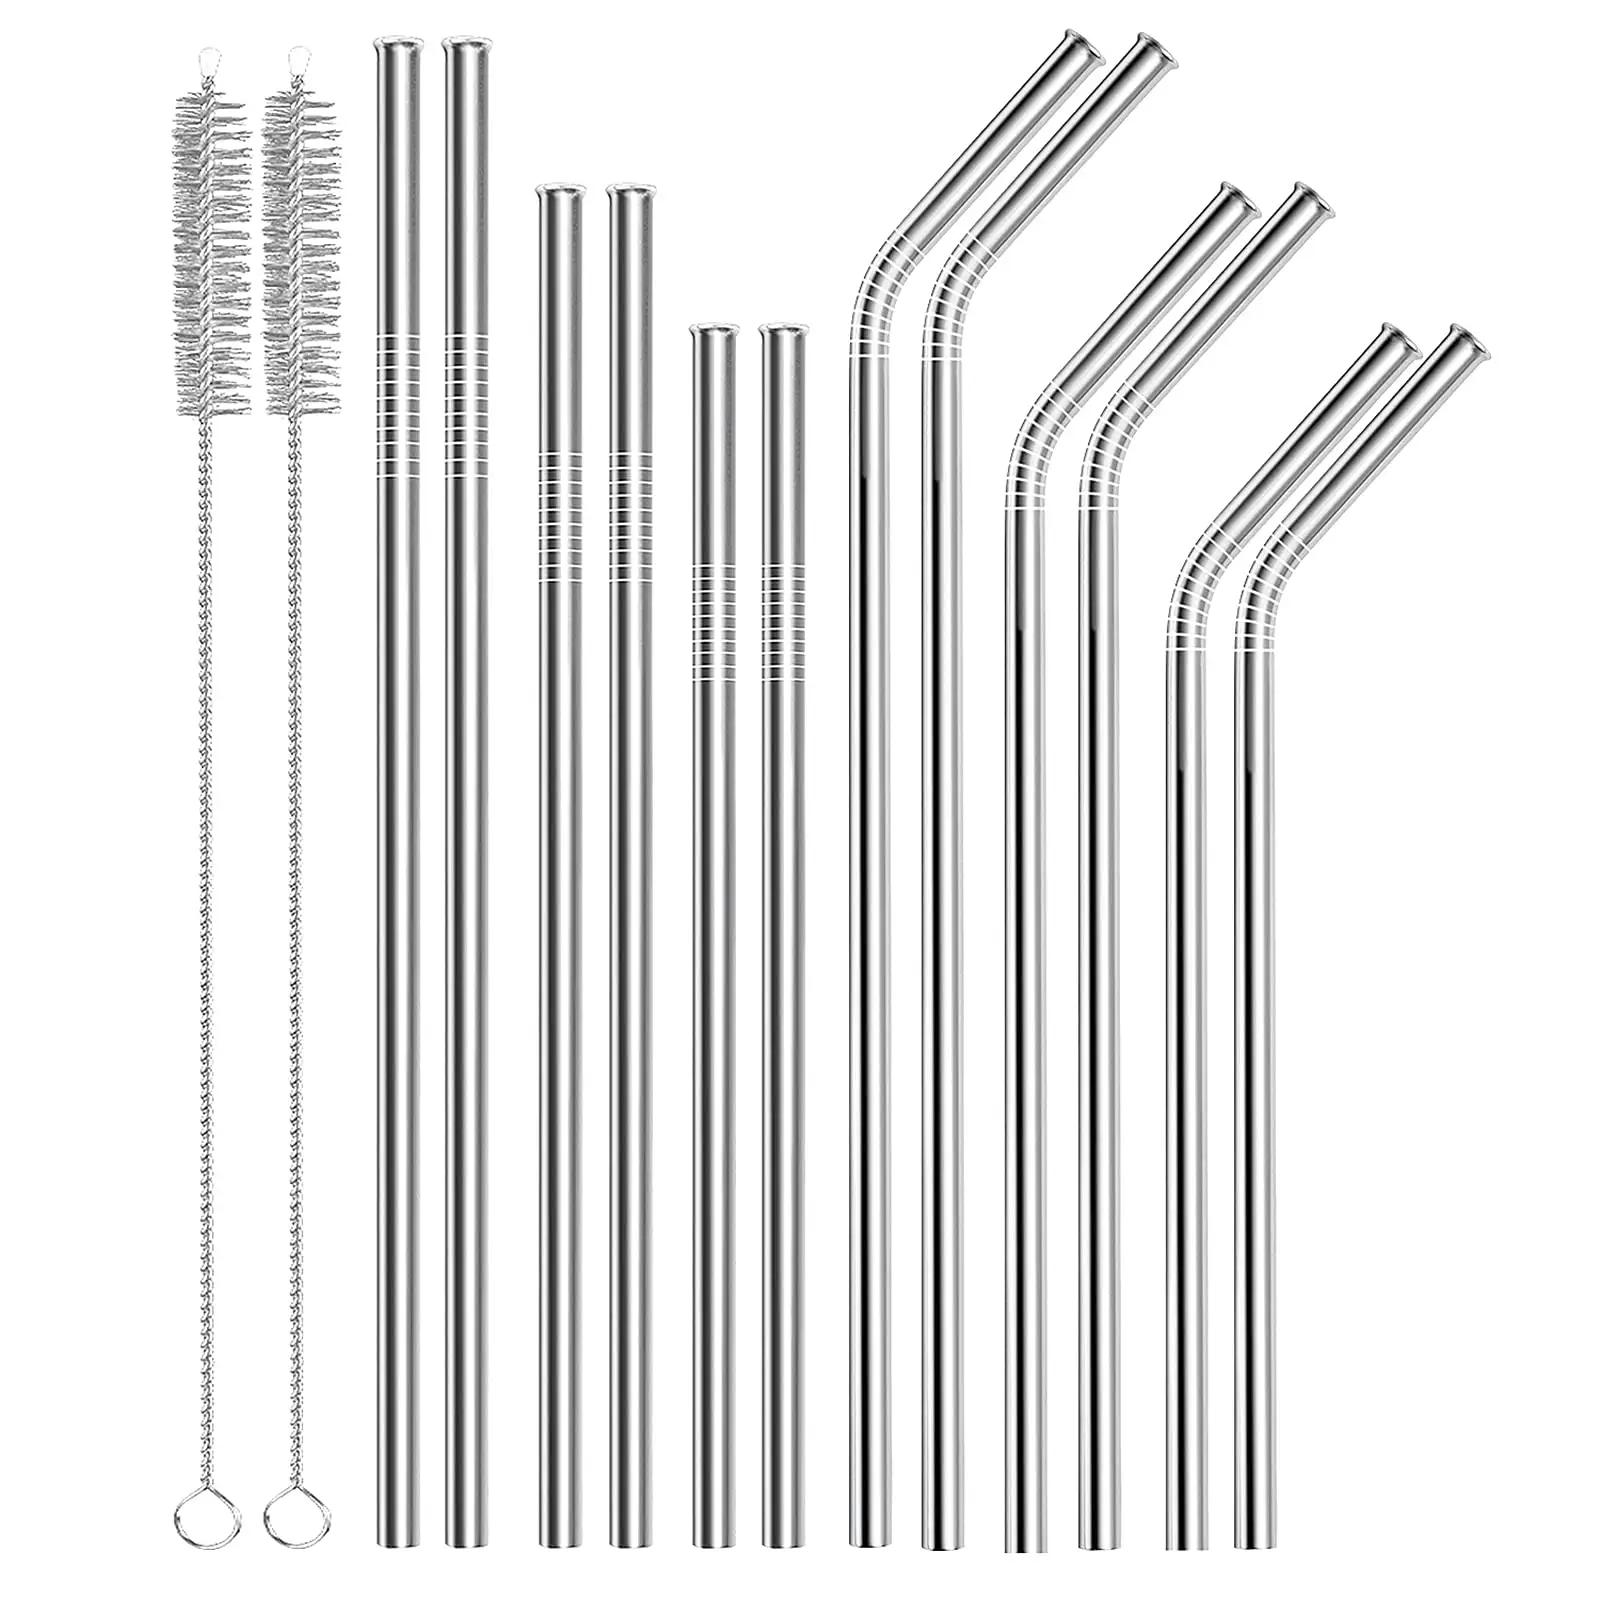 Most Popular Reusable Stainless Steel Metal Straw 6 Straight 6 Bent with 2 Cleaning Brushes and 1 Travel Case